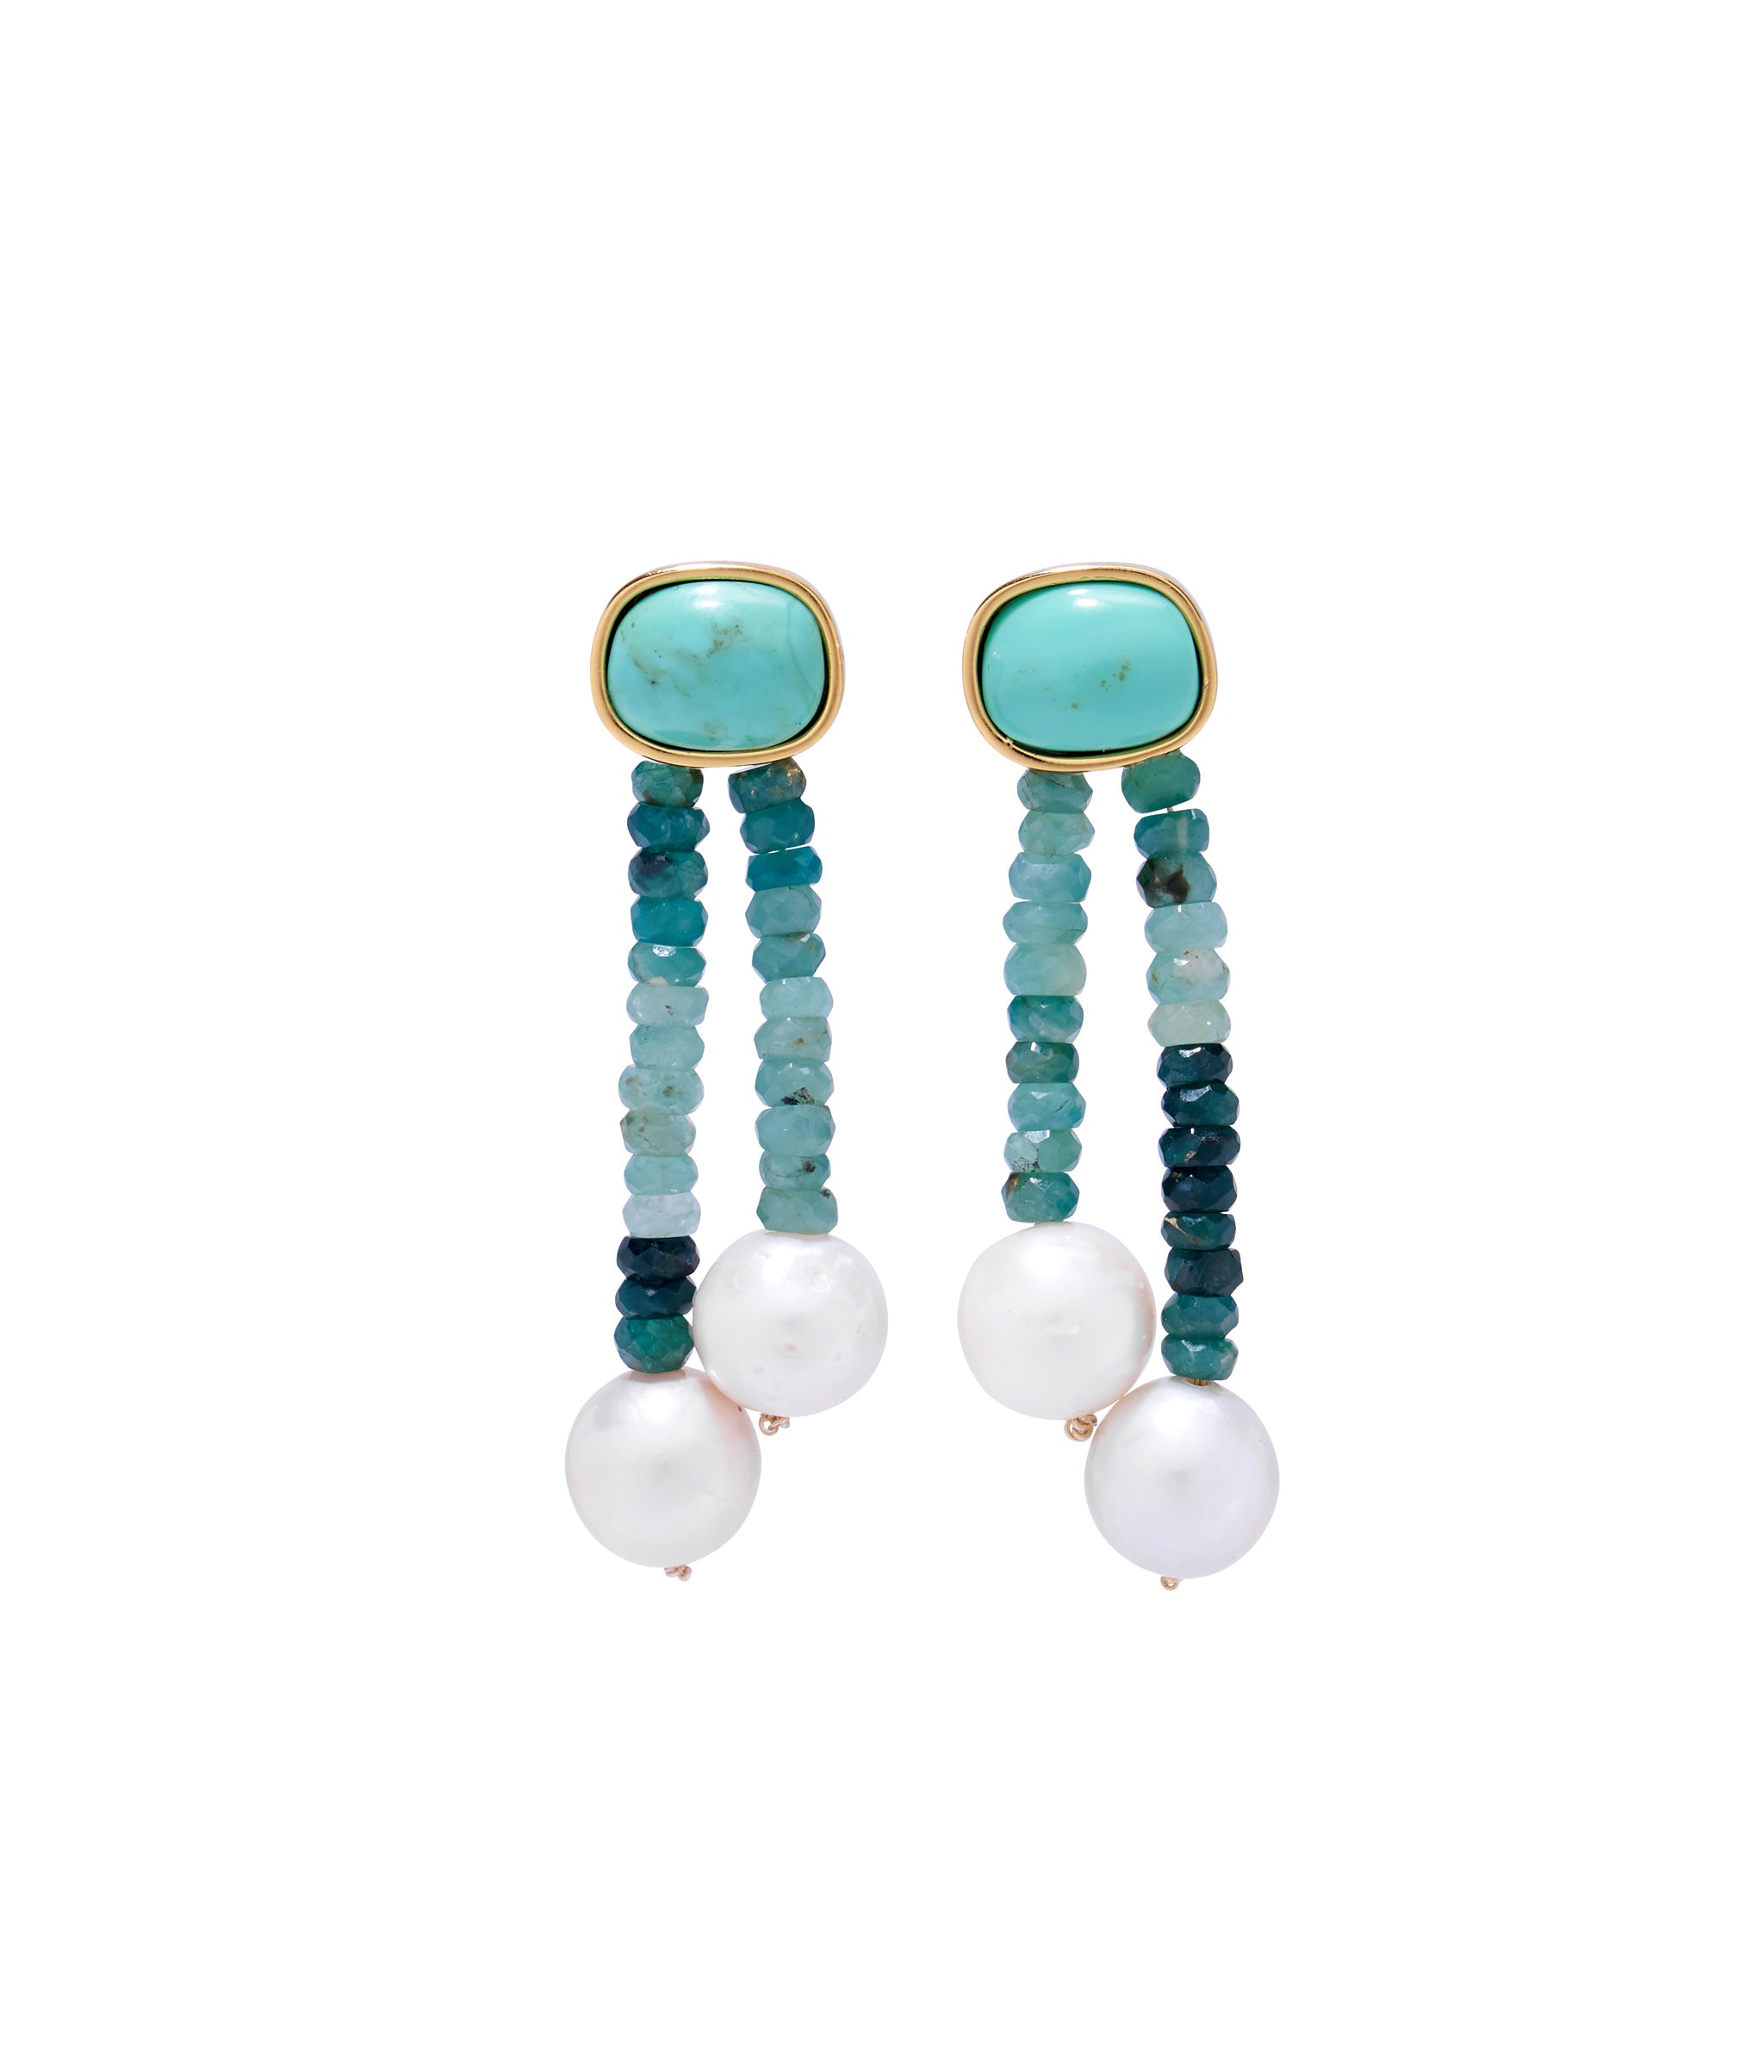 Alvar Earrings in Turquoise. With turquoise tops, shaded blue-green grandidierite beads, and pearl drops.